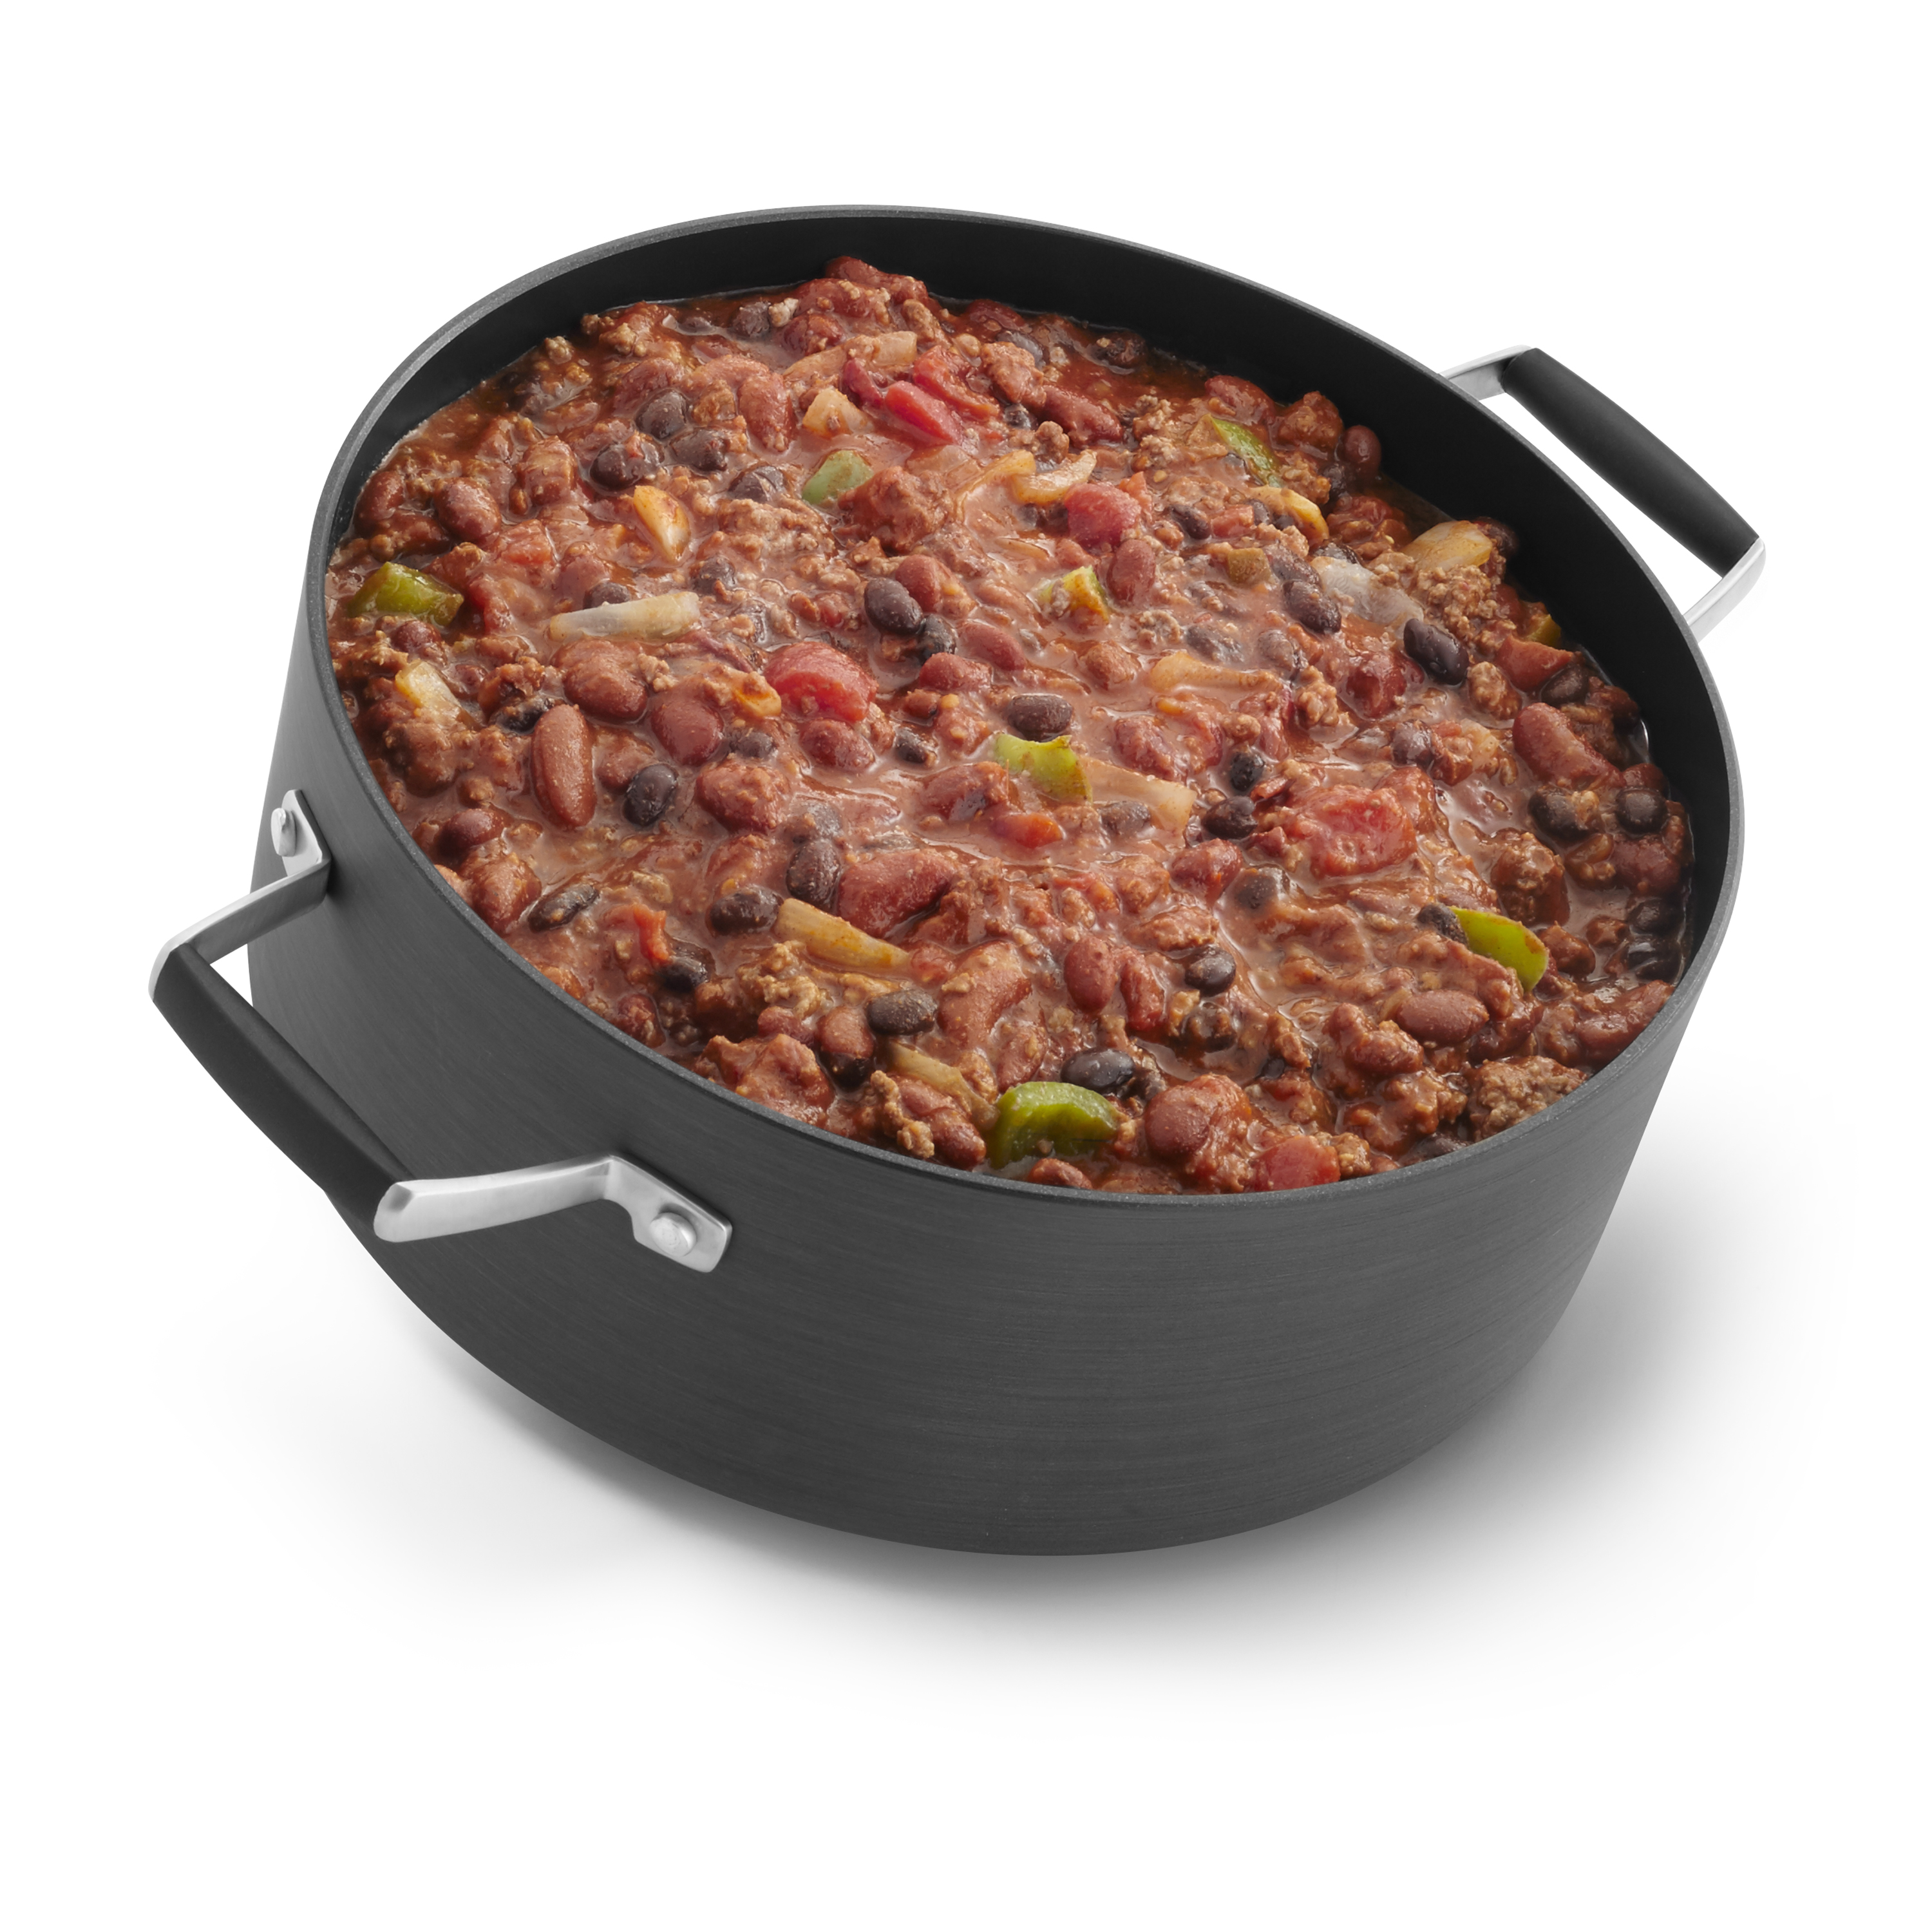 Calphalon Hard-Anodized Nonstick 5-Quart Dutch Oven with Cover - image 3 of 9